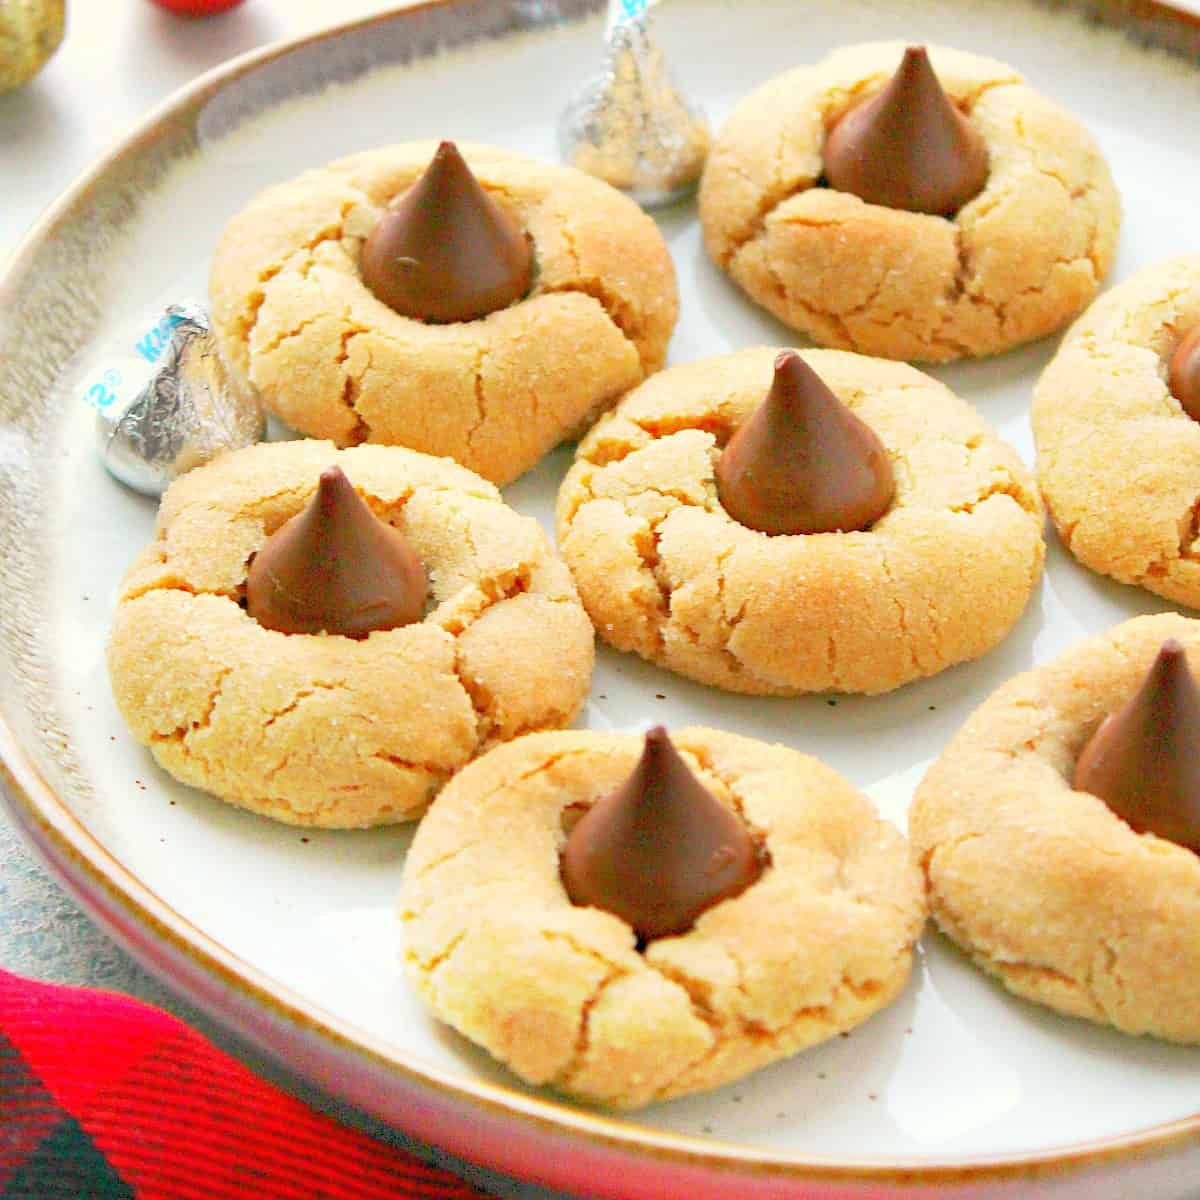 Peanut butter cookies with kisses candy on a plate.